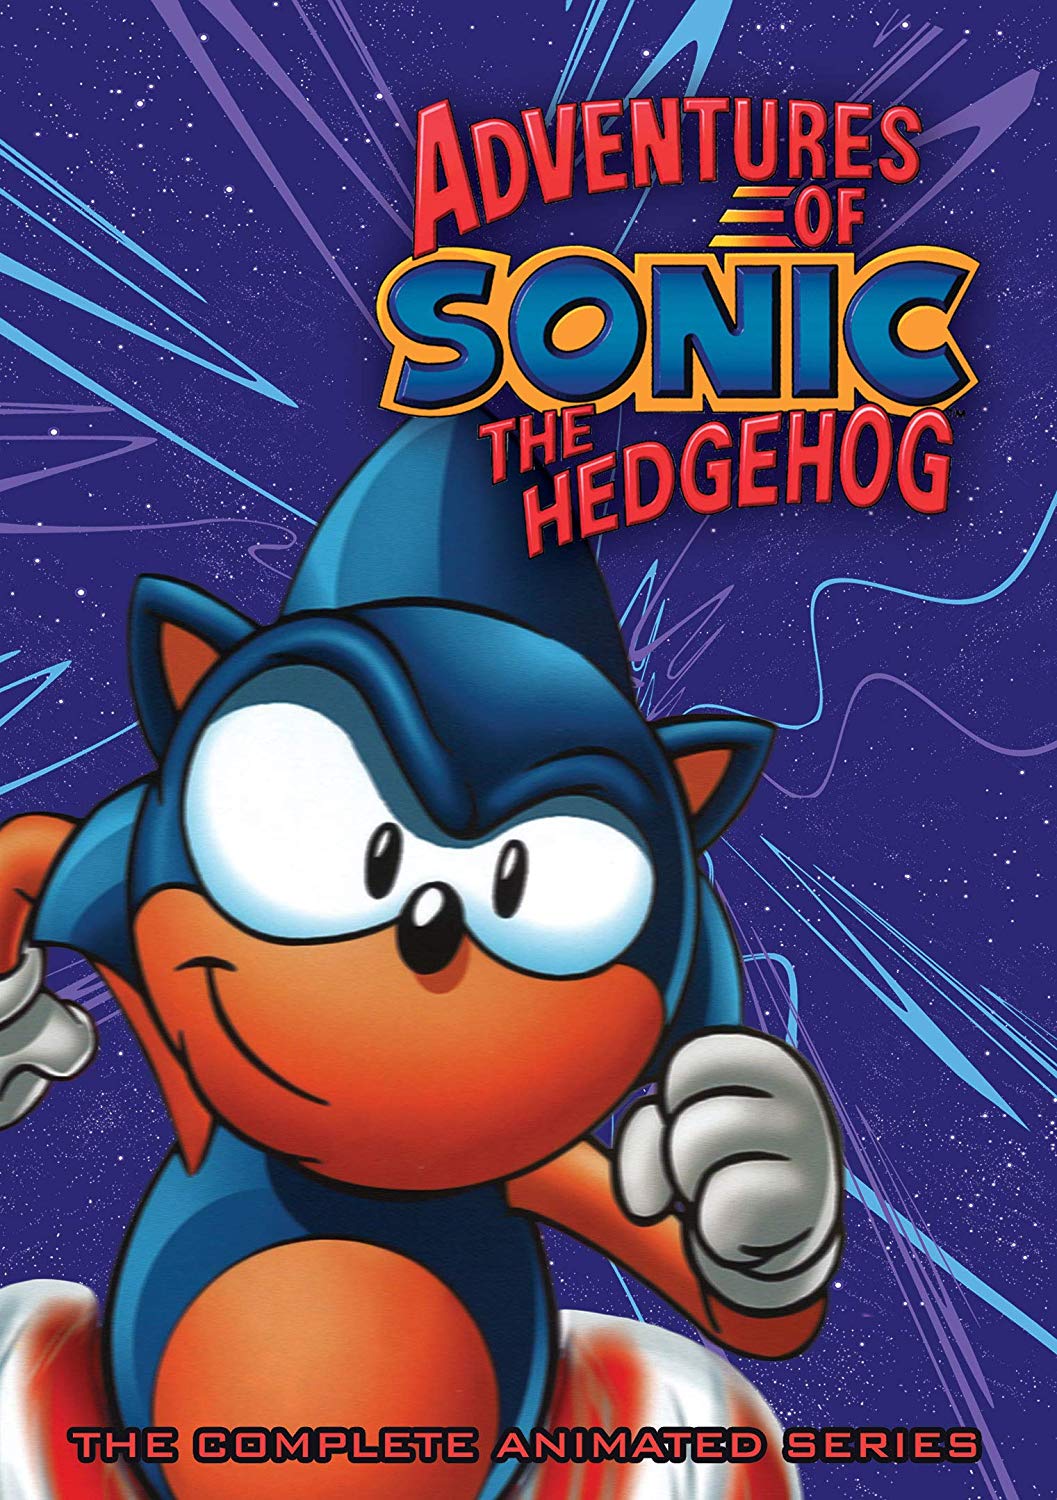 Adventures of Sonic the Hedgehog: The Complete Animated Series | Sonic News Network | Fandom